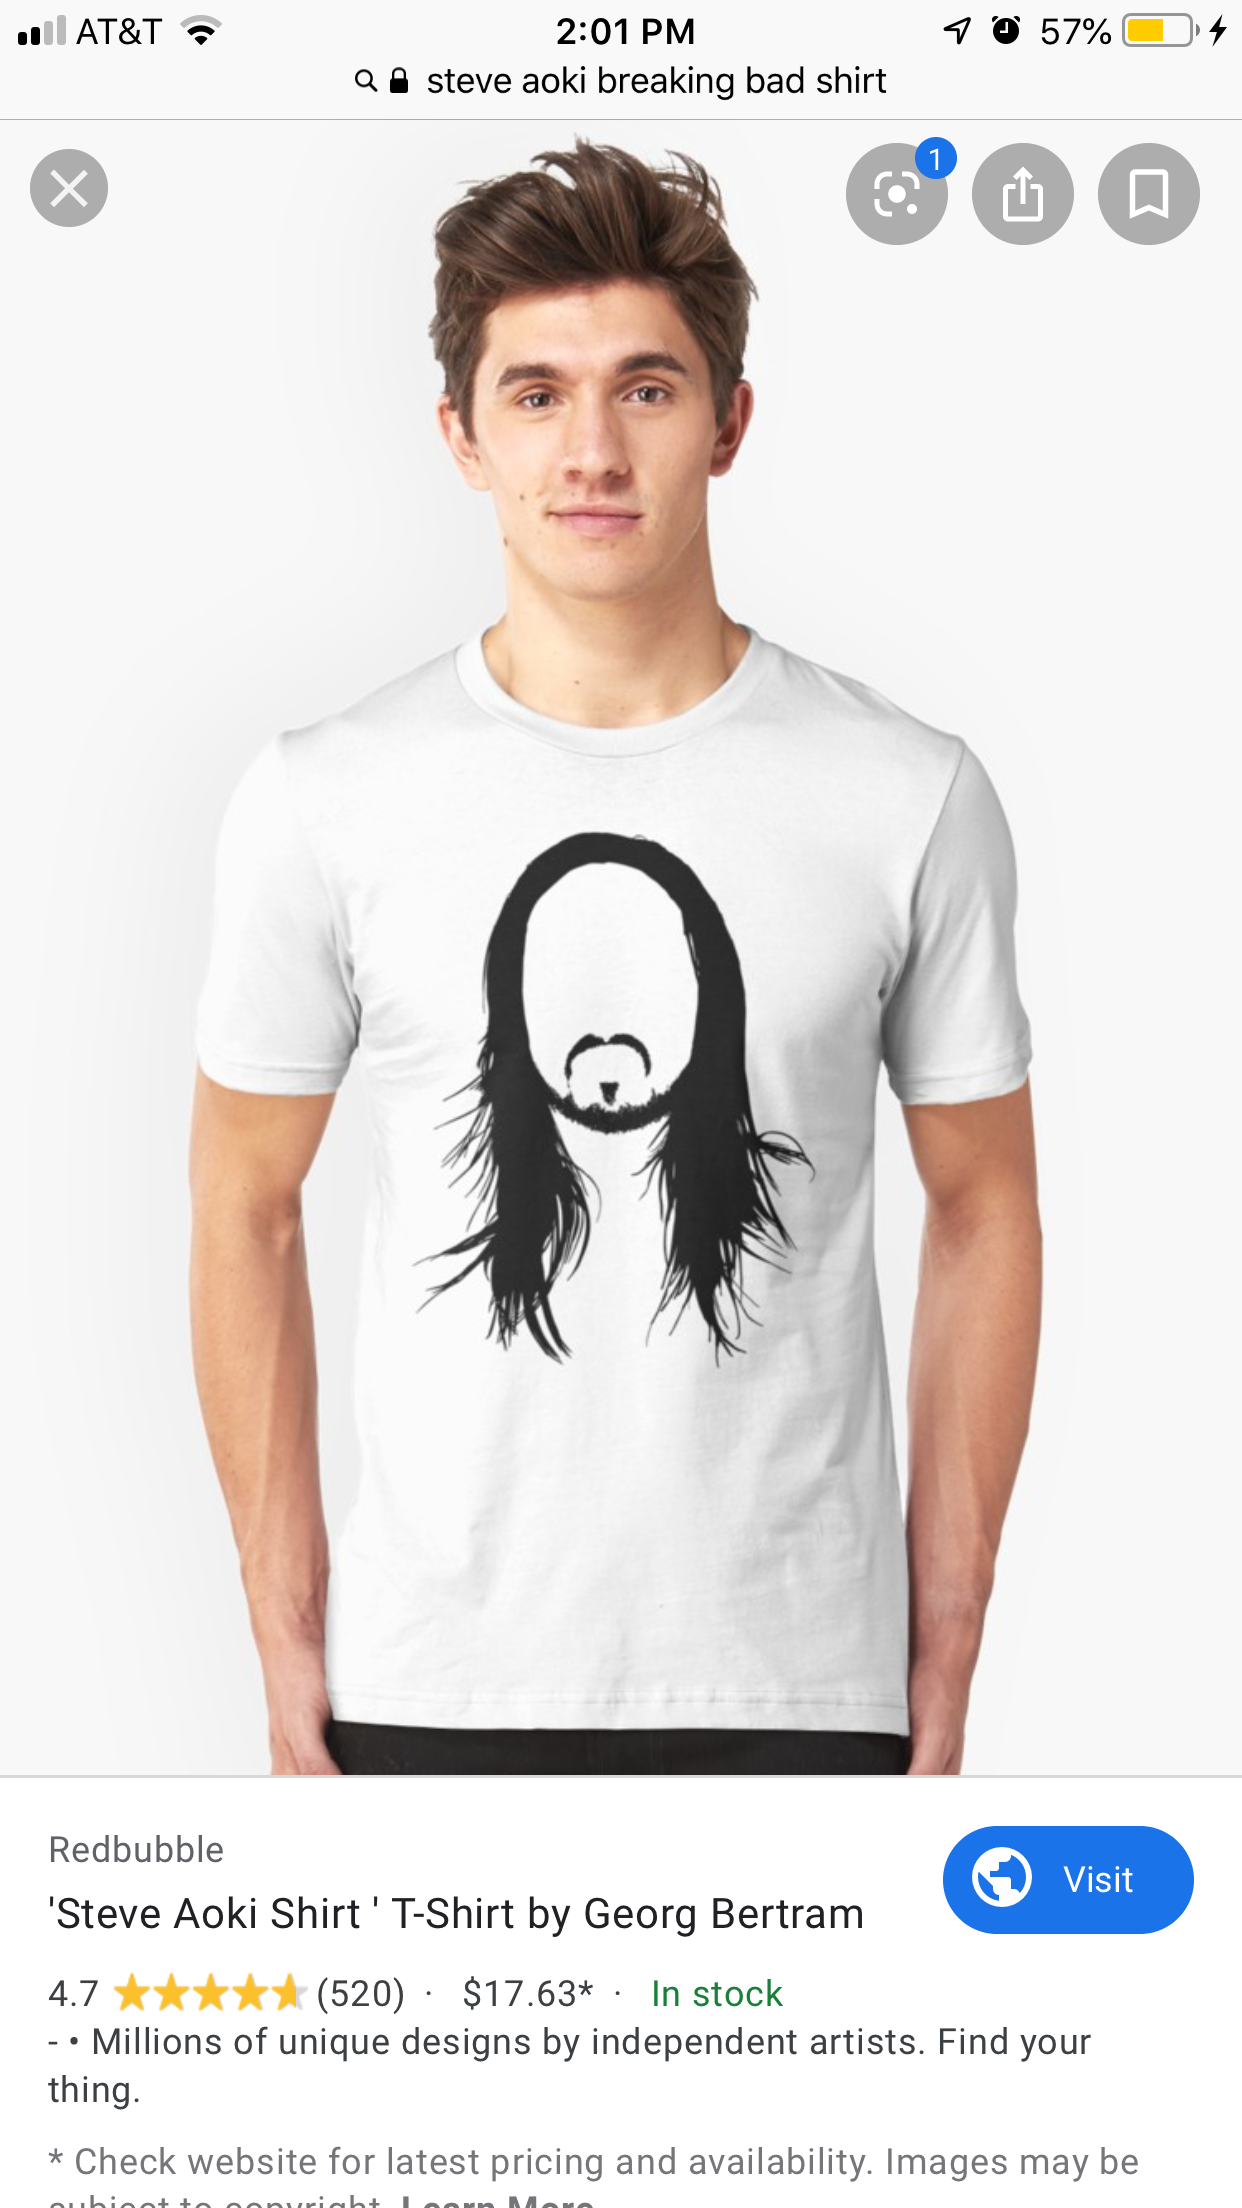 t shirt - At&T 16 57% 9 stove aoki breaking bad shirt Redbubble Visit Steve Aoki Shirt TShirt by Georg Bertram 4.7520 $17.63 In stock Millions of unique designs by independent artists. Find your thing Check website for latest pricing and availability. Ima